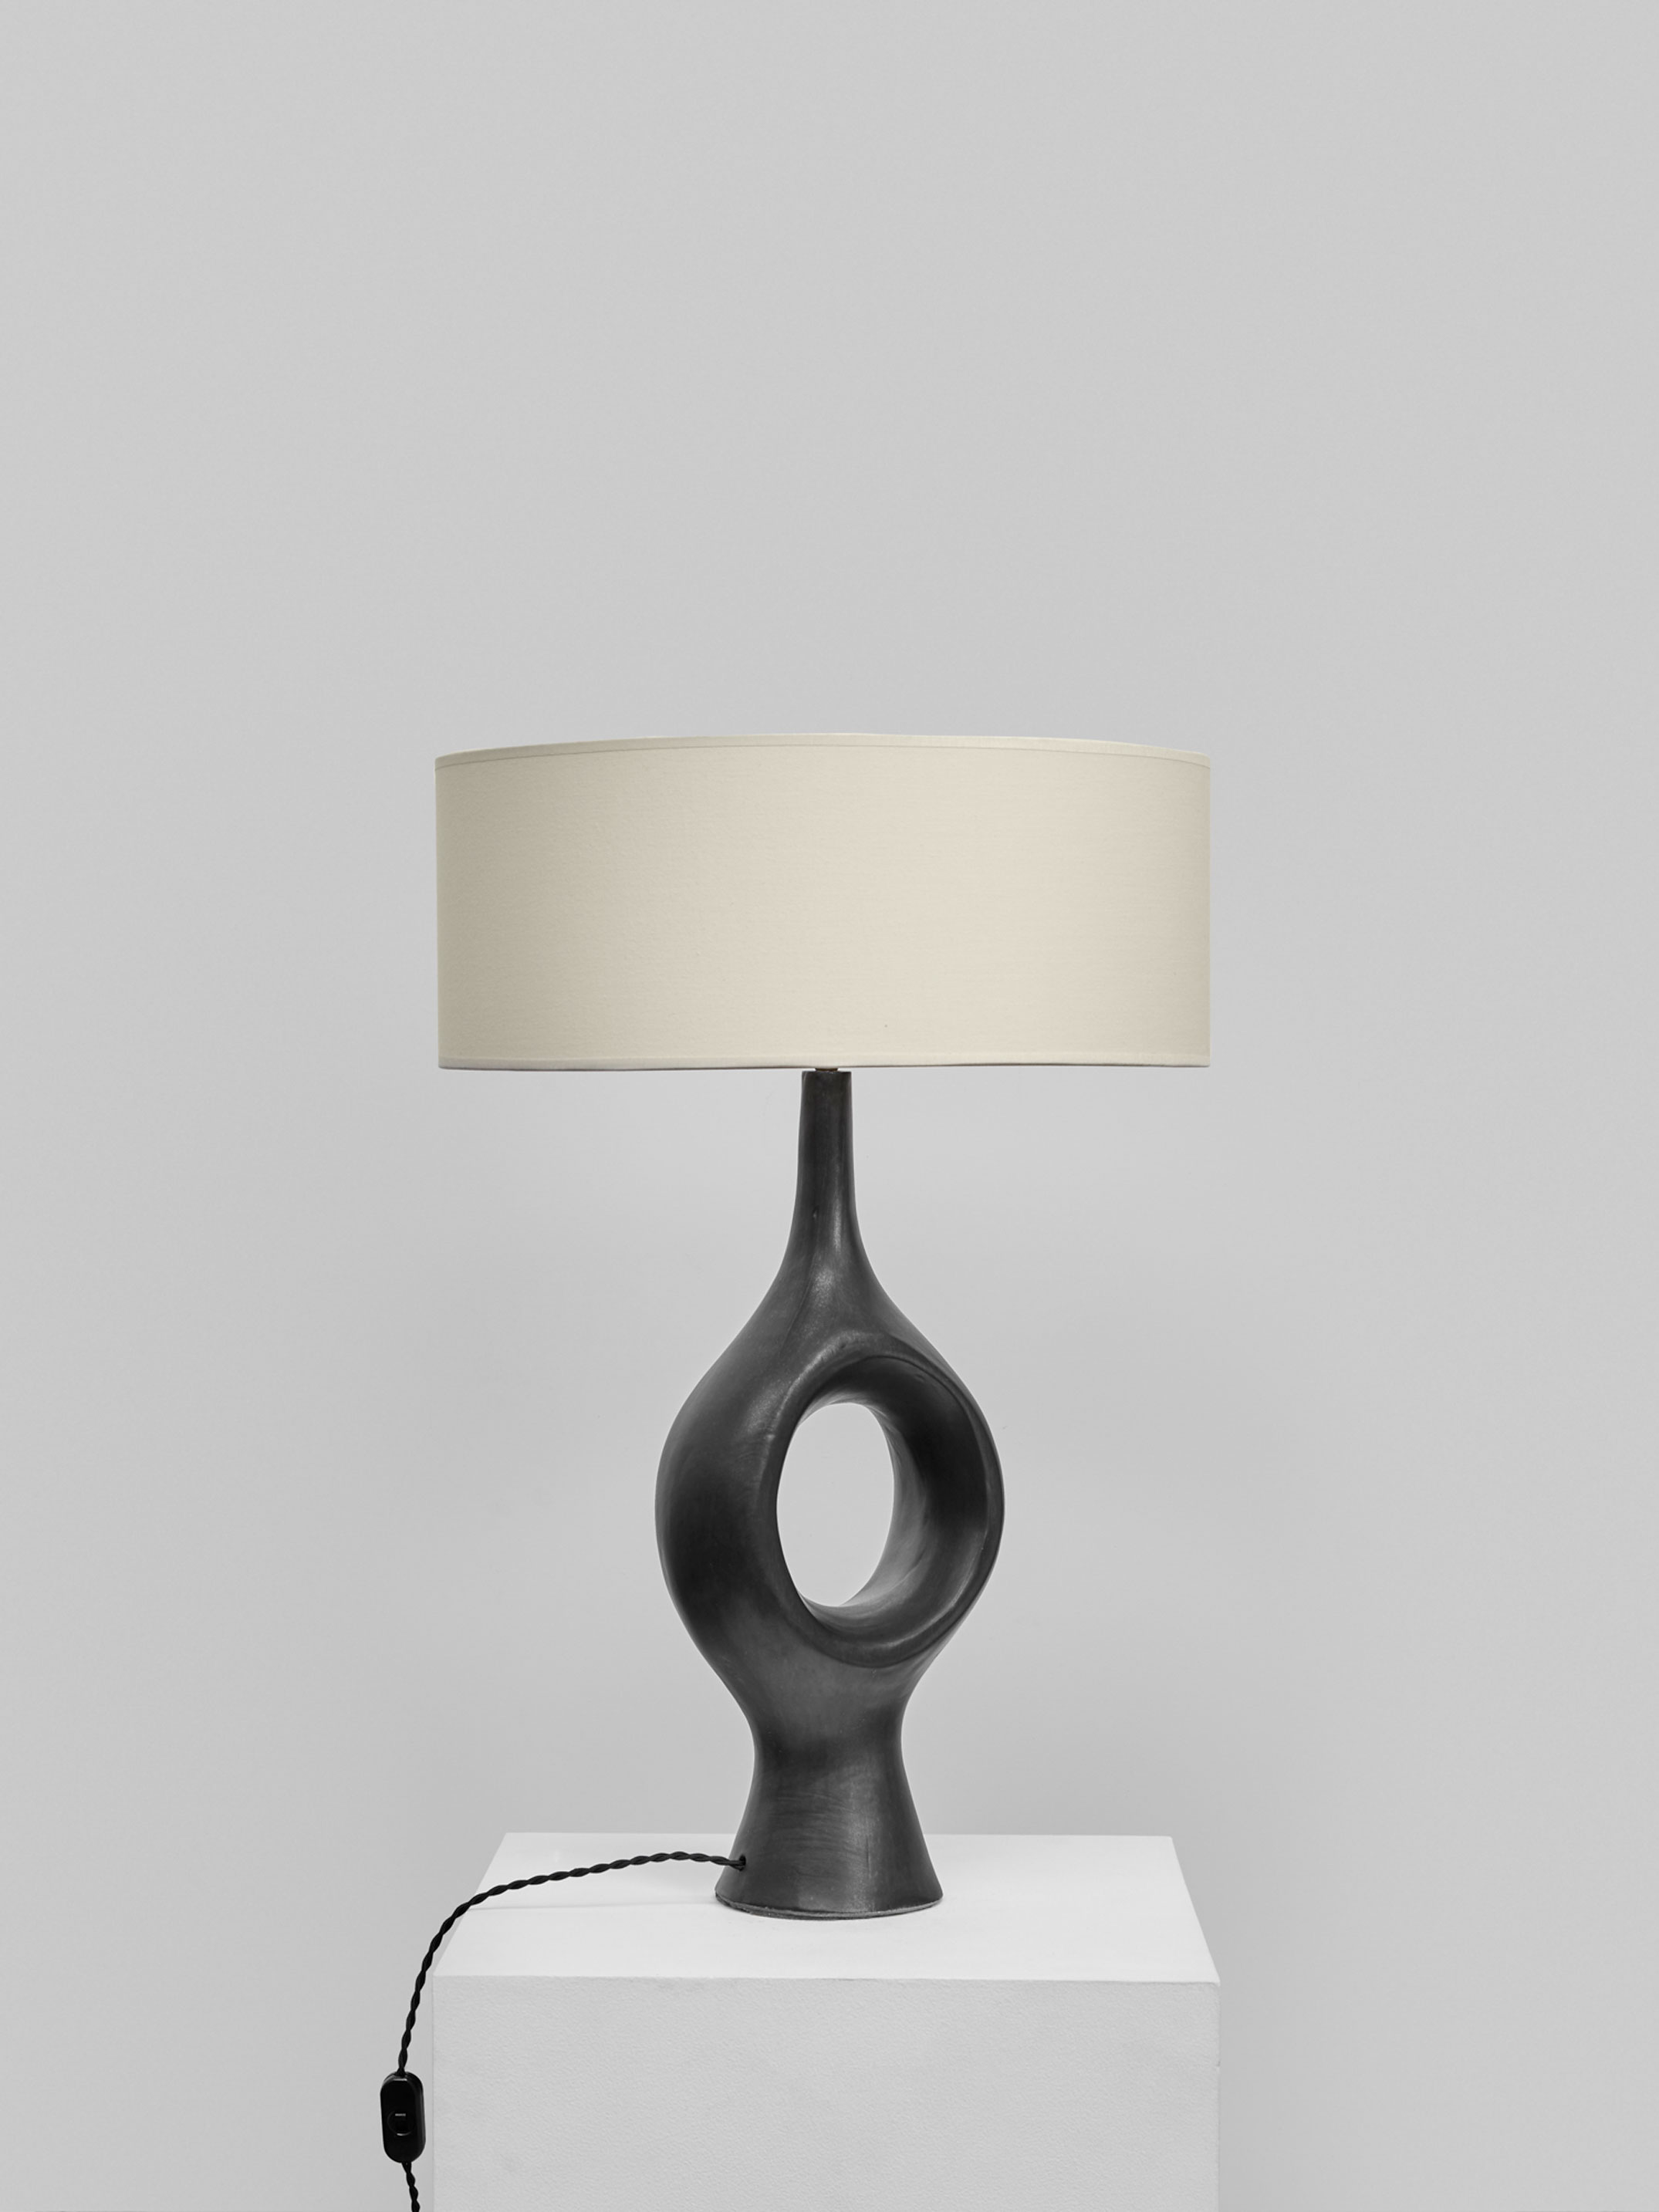 Georges Jouve, Exceptional and rare lamp, vue 01